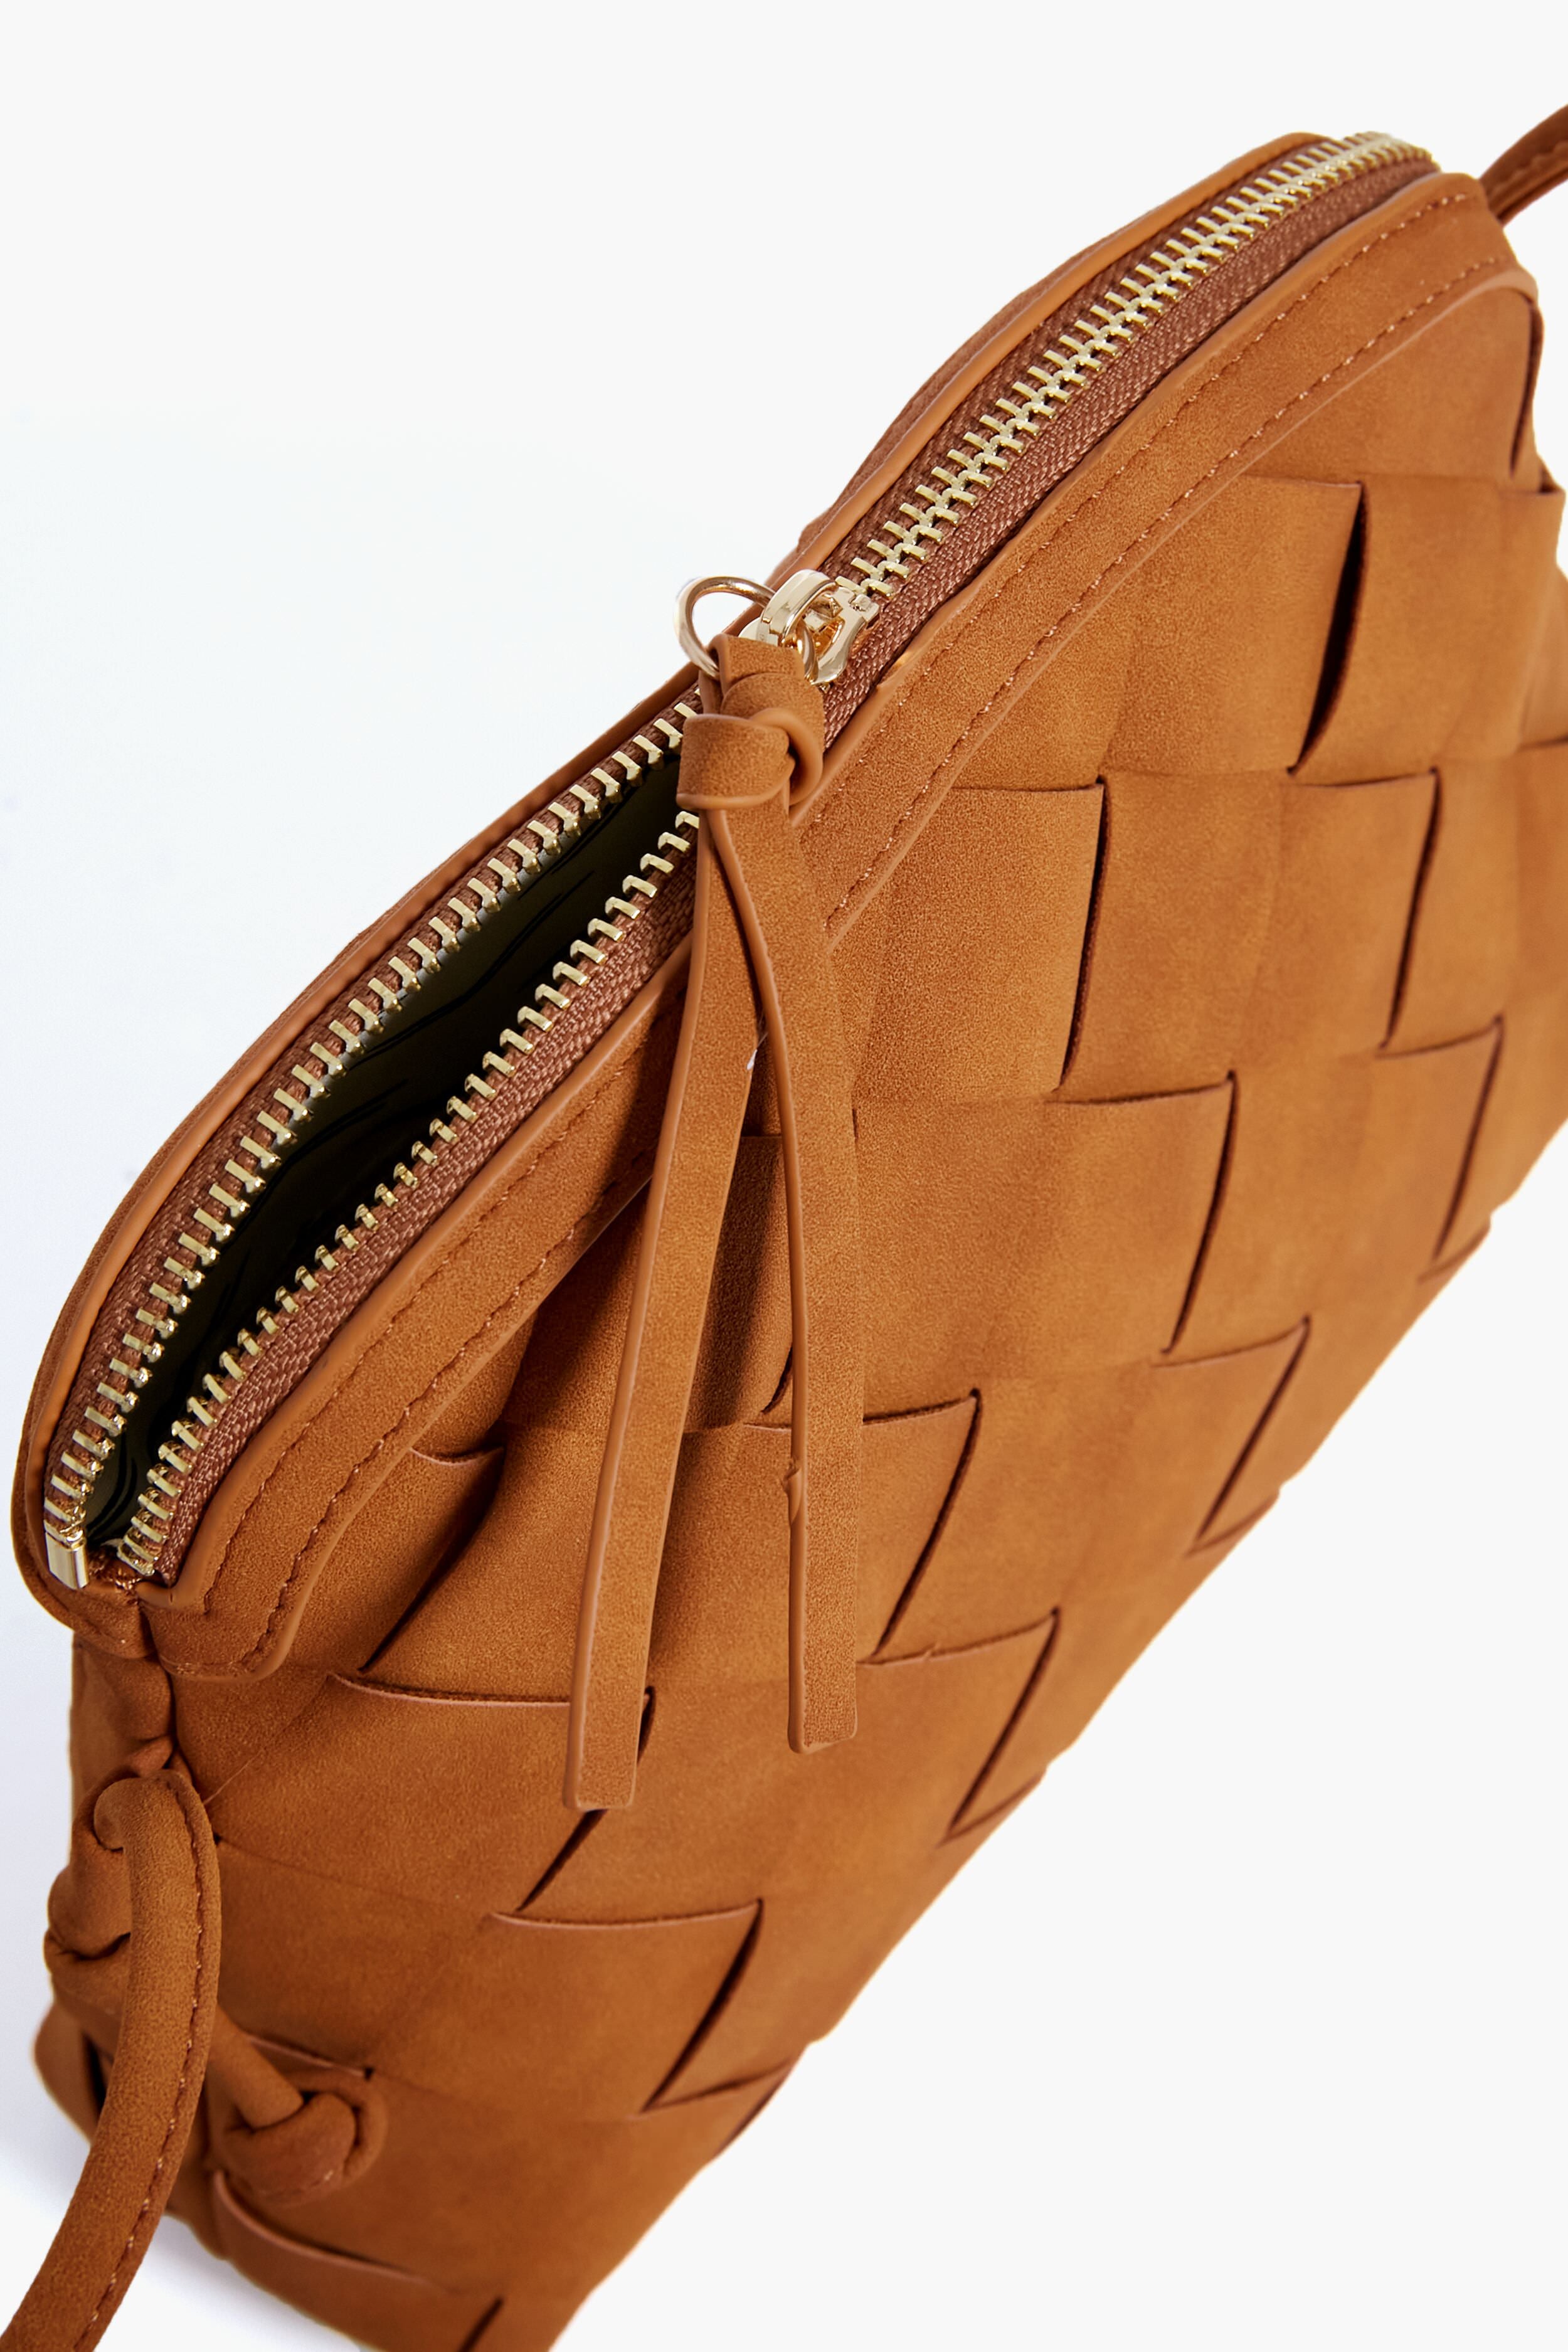 Moda Luxe leather and suede Backpack / Purse NWT for Sale in La